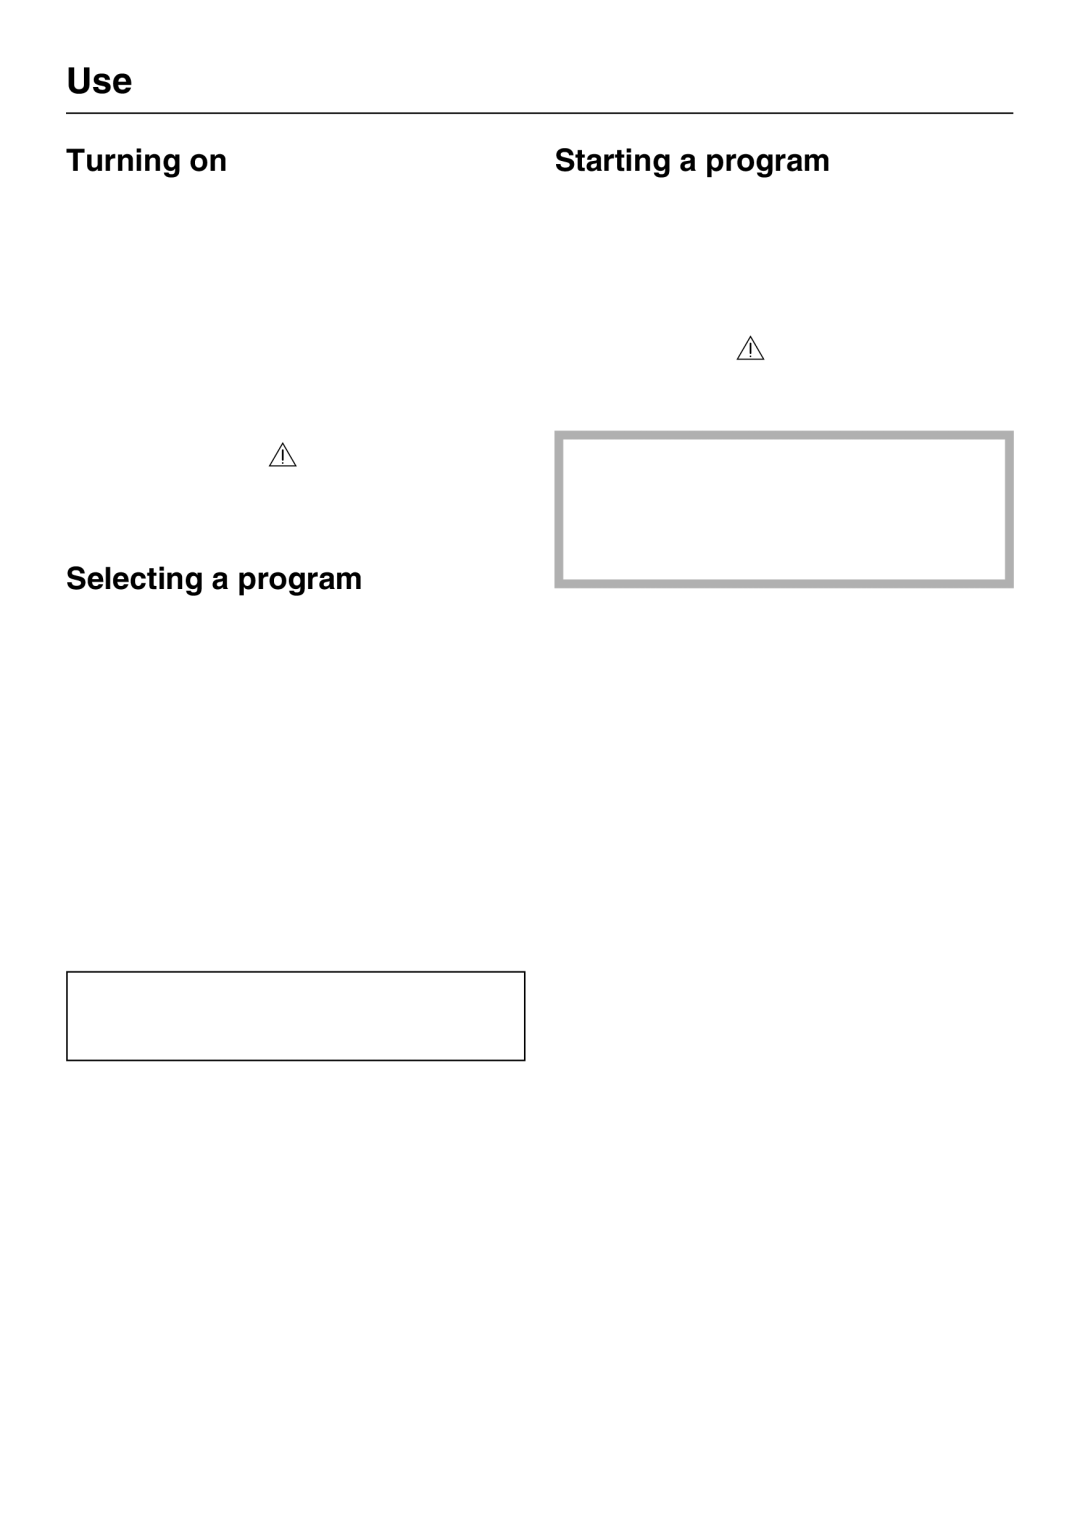 Miele G 4225, G 4220 operating instructions Turning on, Selecting a program, Starting a program 